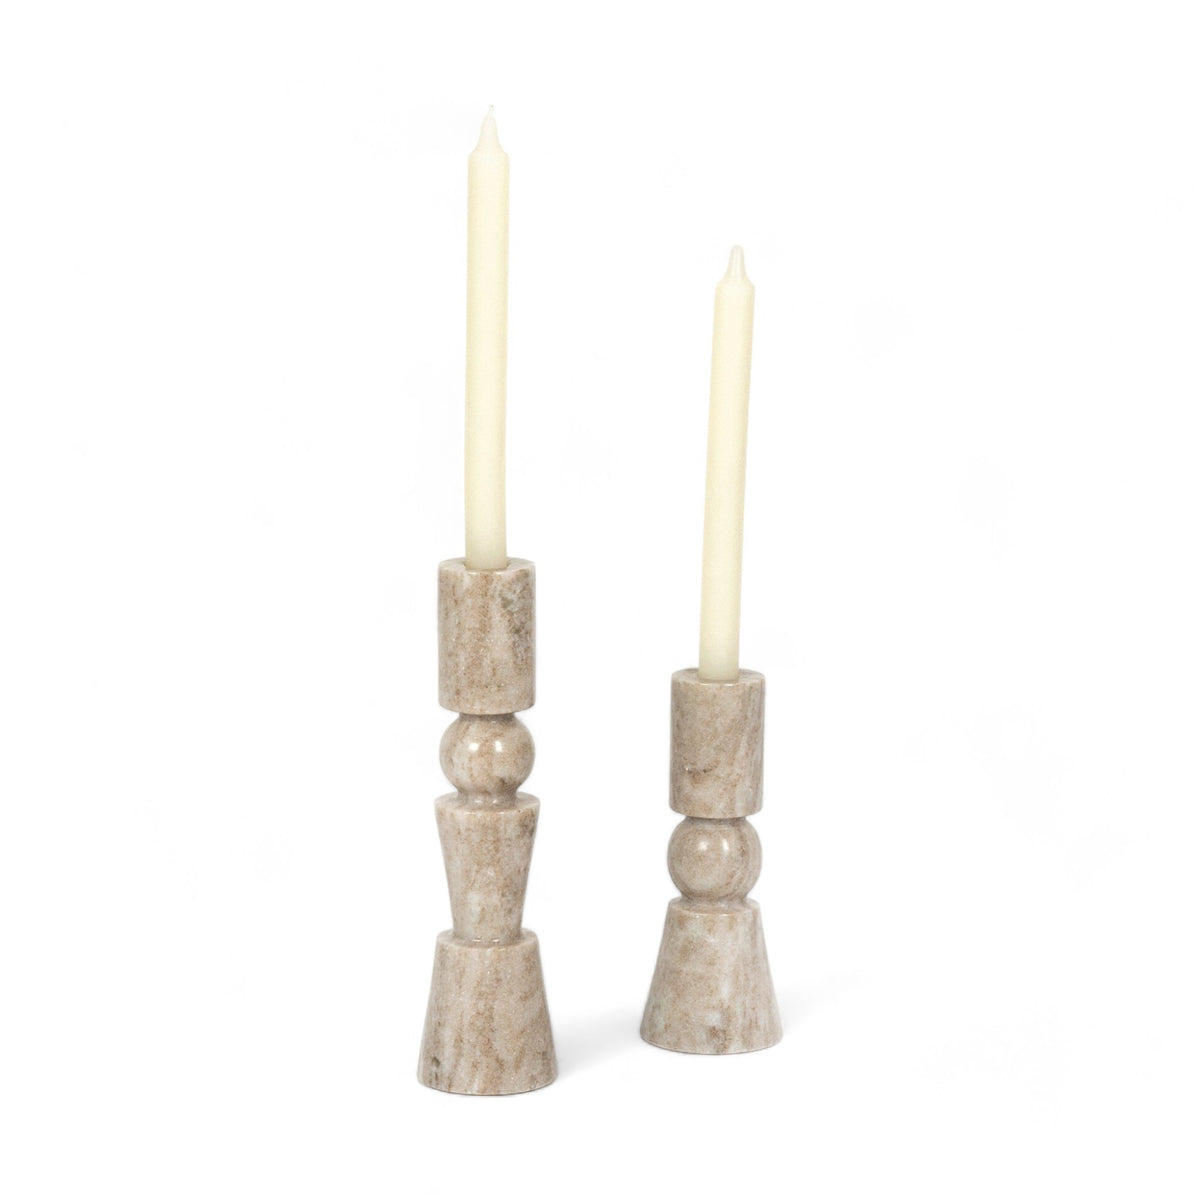 Marble Taper Candlesticks - Pair